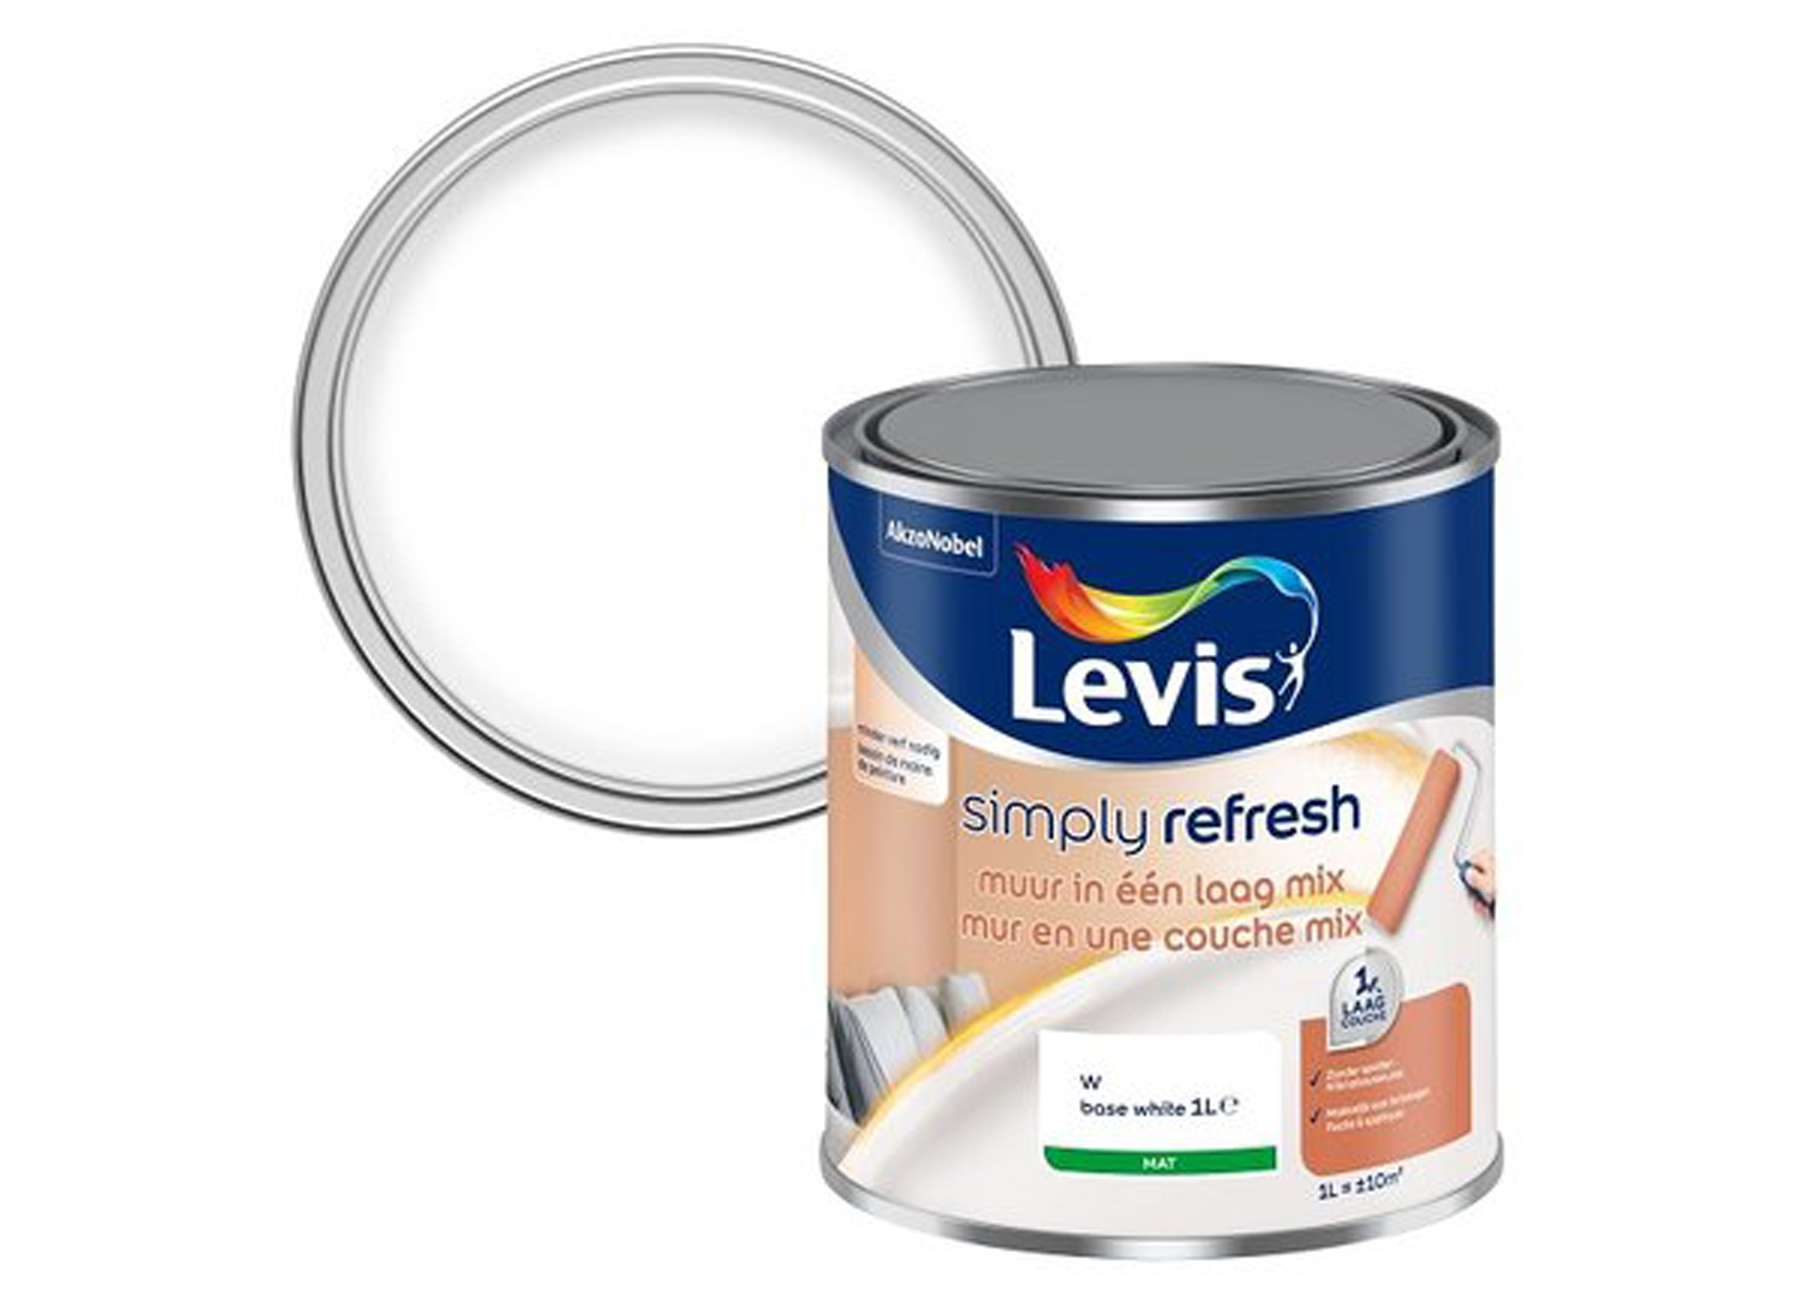 LEVIS SIMPLY REFRESH MUUR IN EEN LAAG MIX WHITE 1L